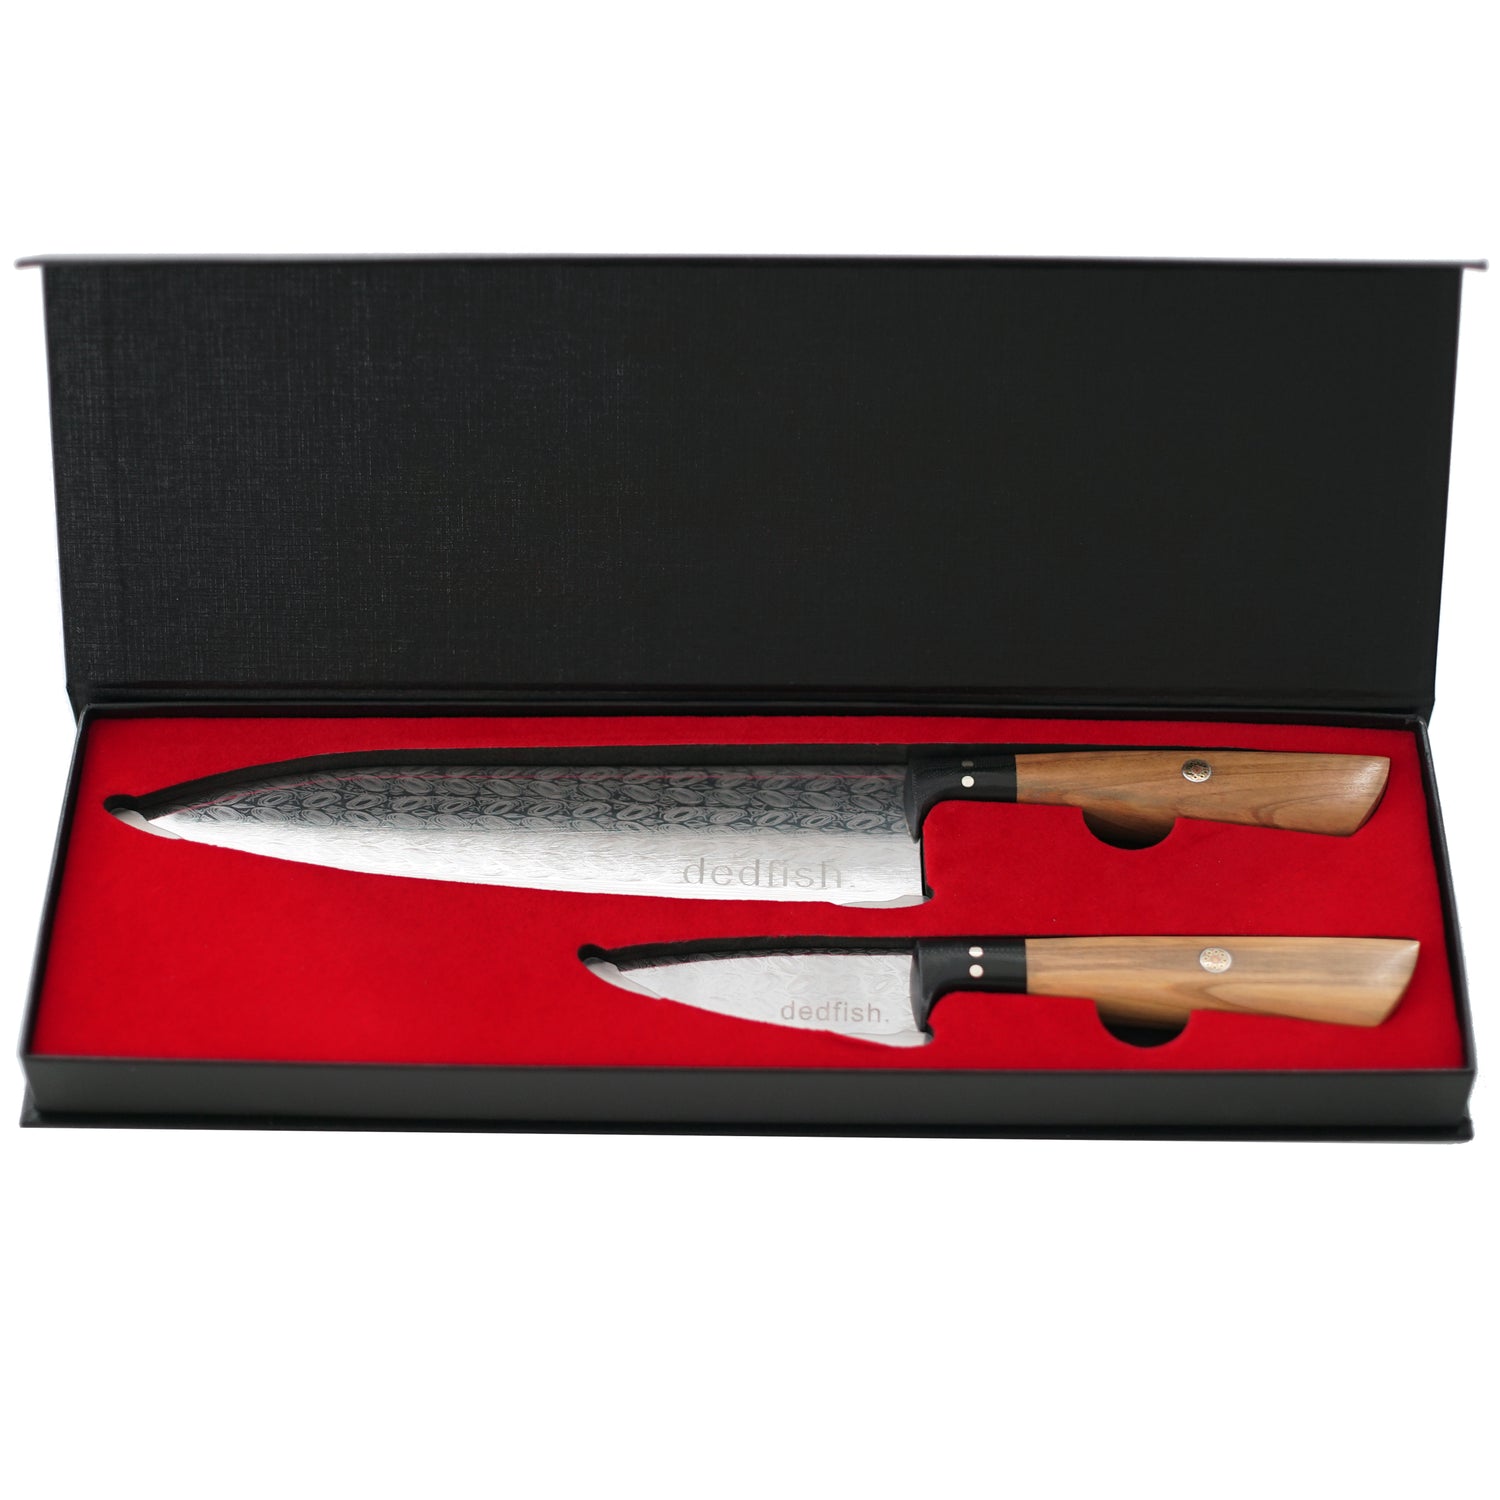 Dedfish Co. Kitchen Knife Set - Laser Etched Stainless Steel with Olive Wood Handles_7_cc